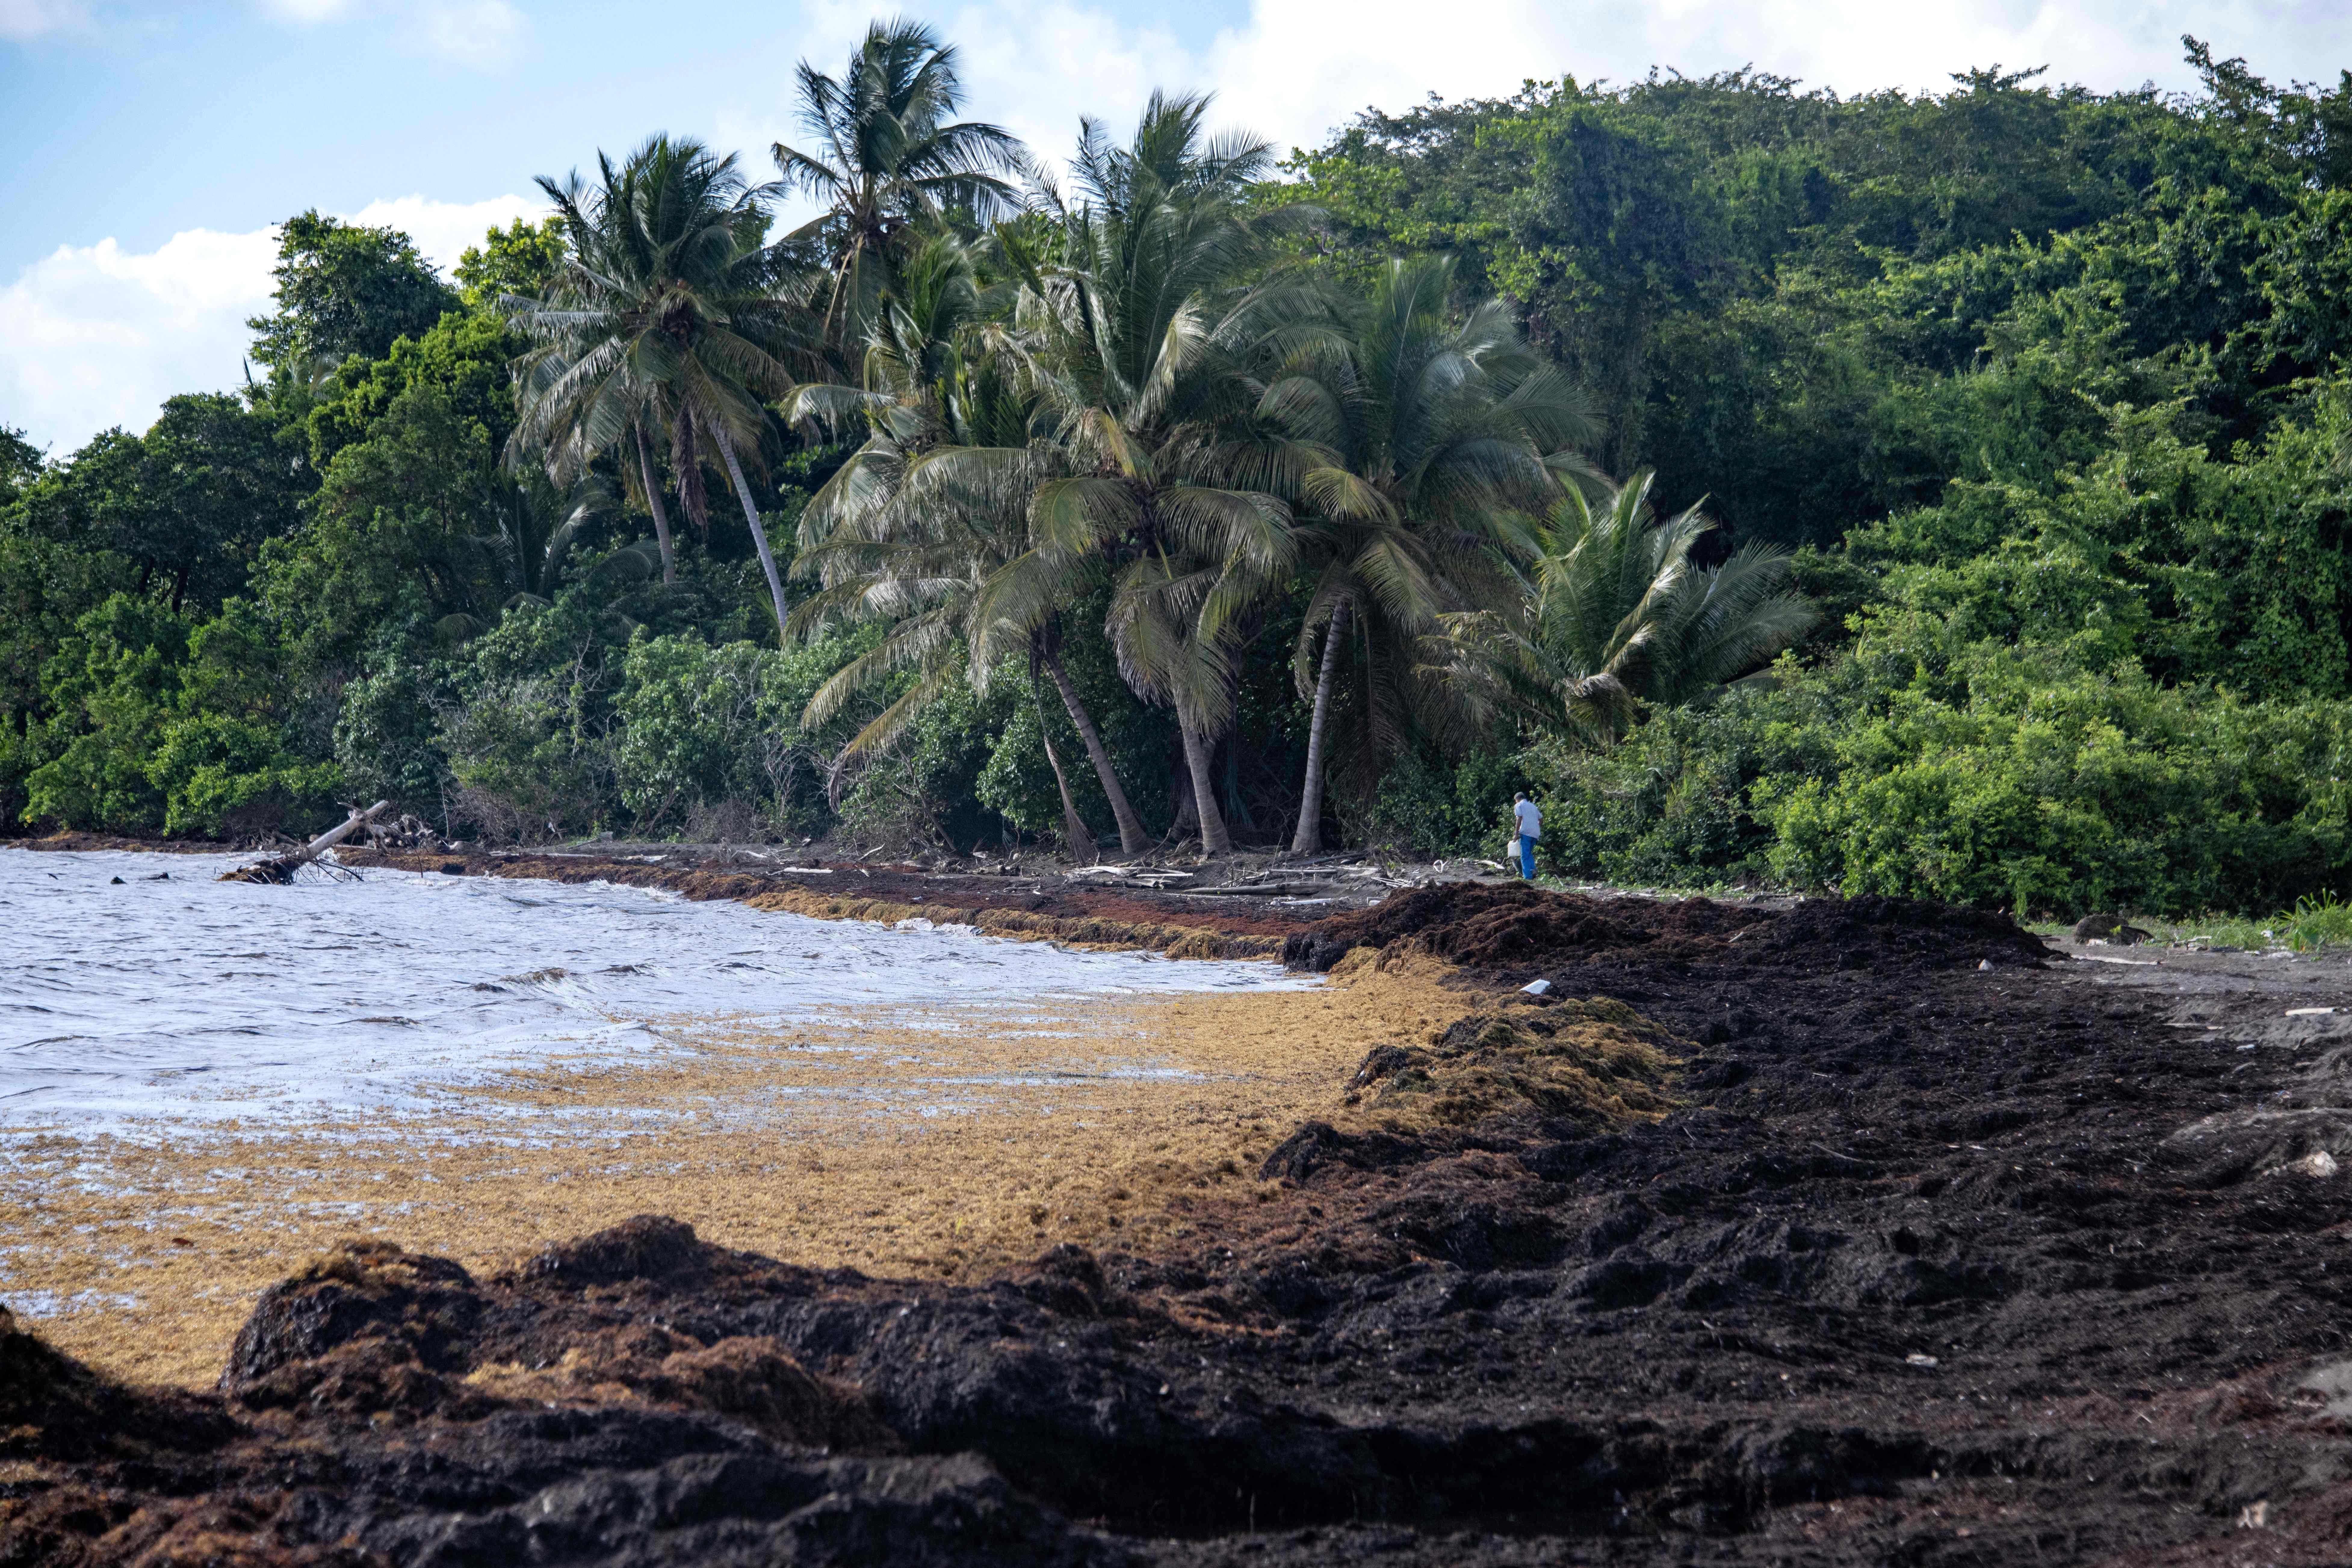 Carribean beach with palm trees and brown and black seaweed washes ashore.